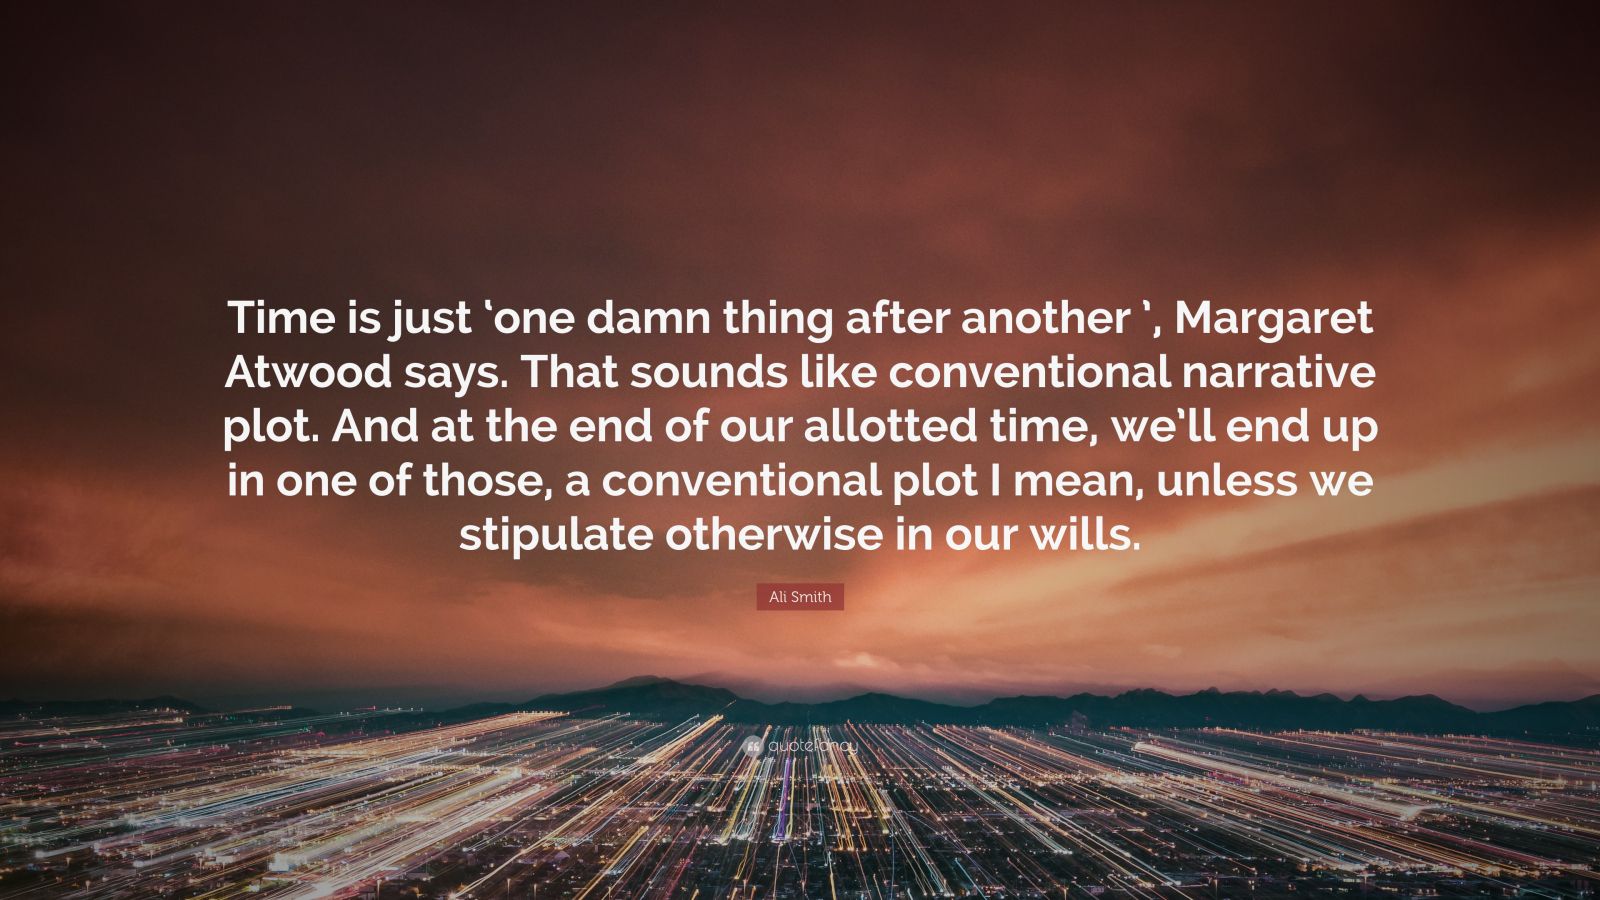 Ali Smith Quote: “Time is just ‘one damn thing after another ...